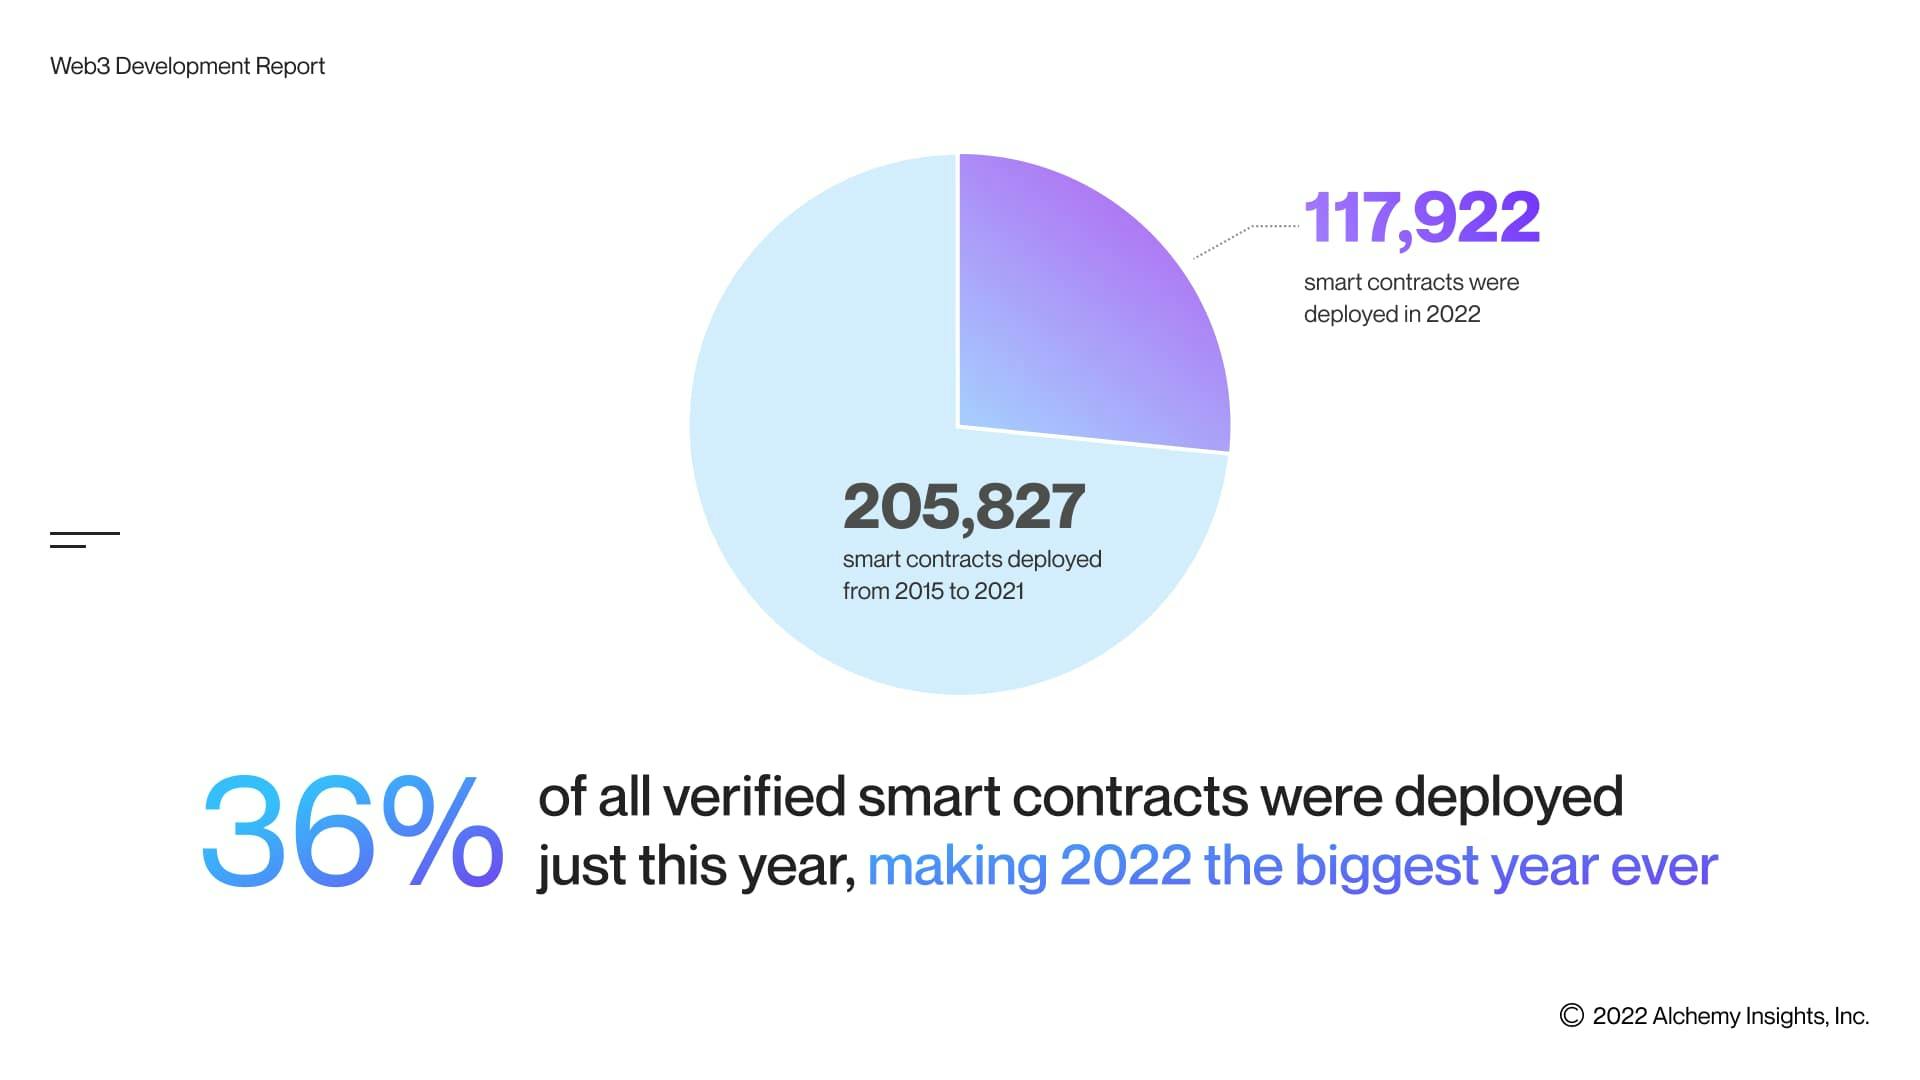 2022 is the biggest year of verified smart contracts deployed to date.